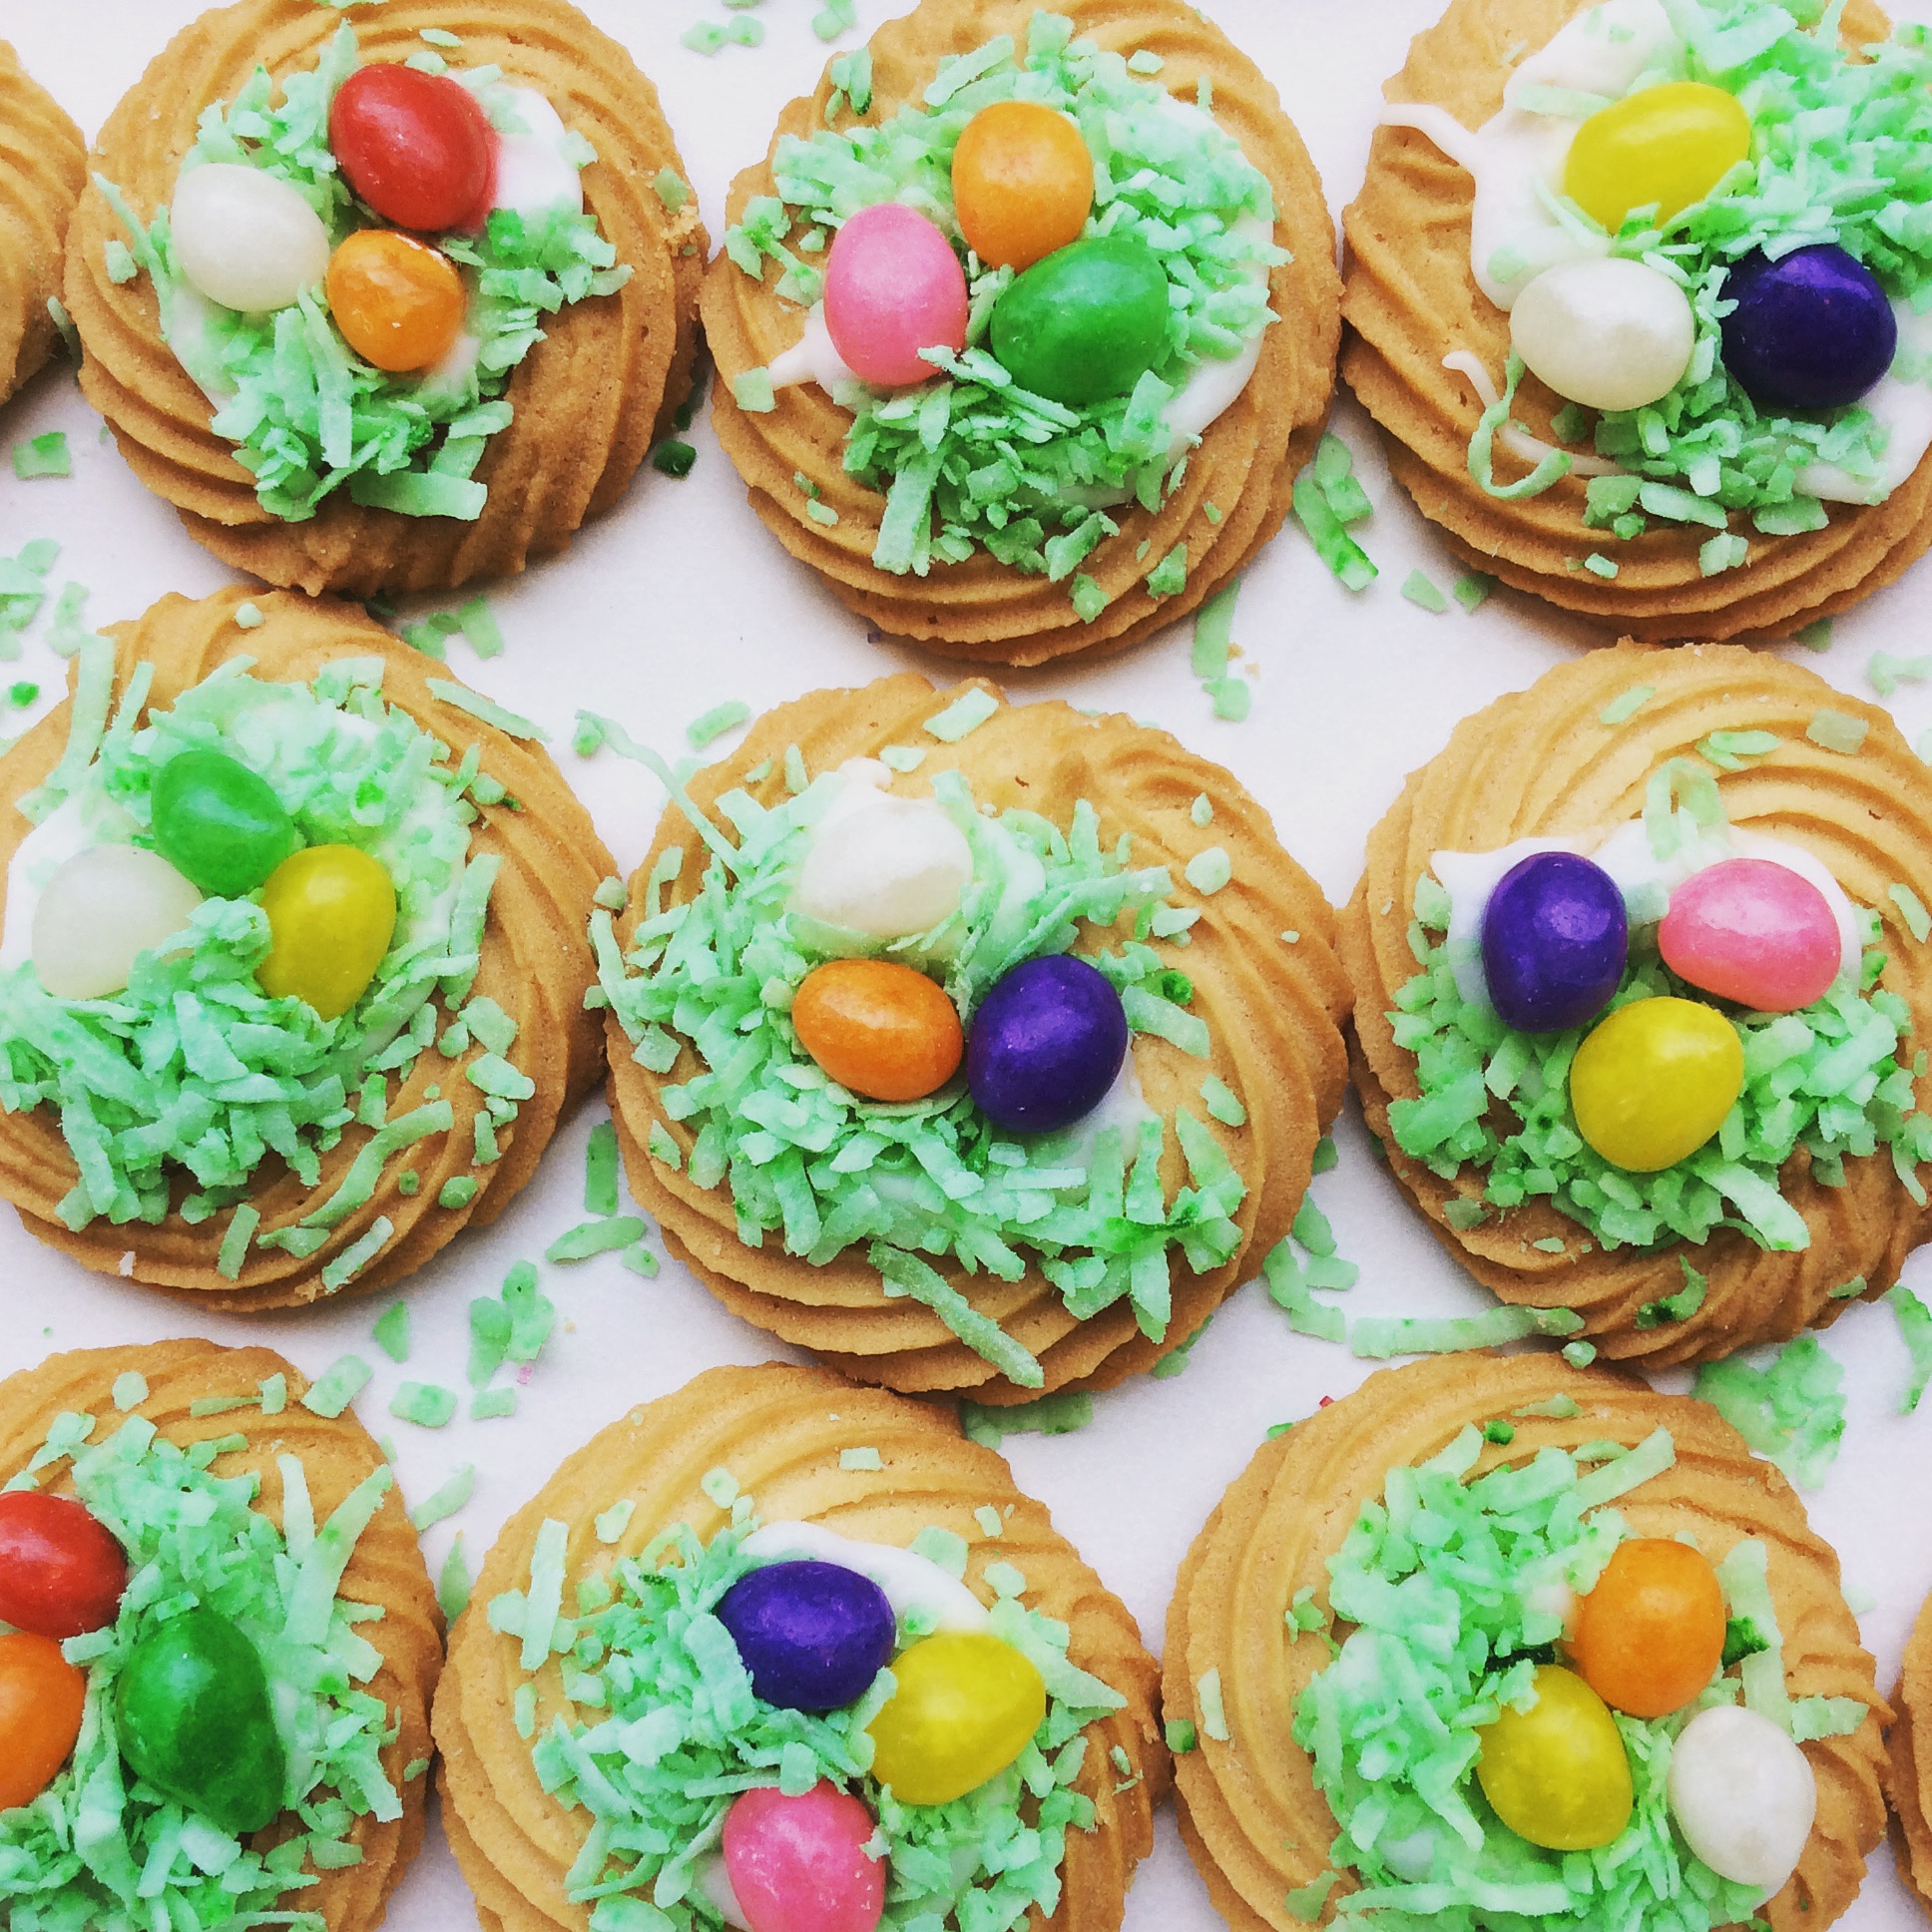 Rows of Easter butter cookies, decorated with icing, green coconut, and jellybeans.